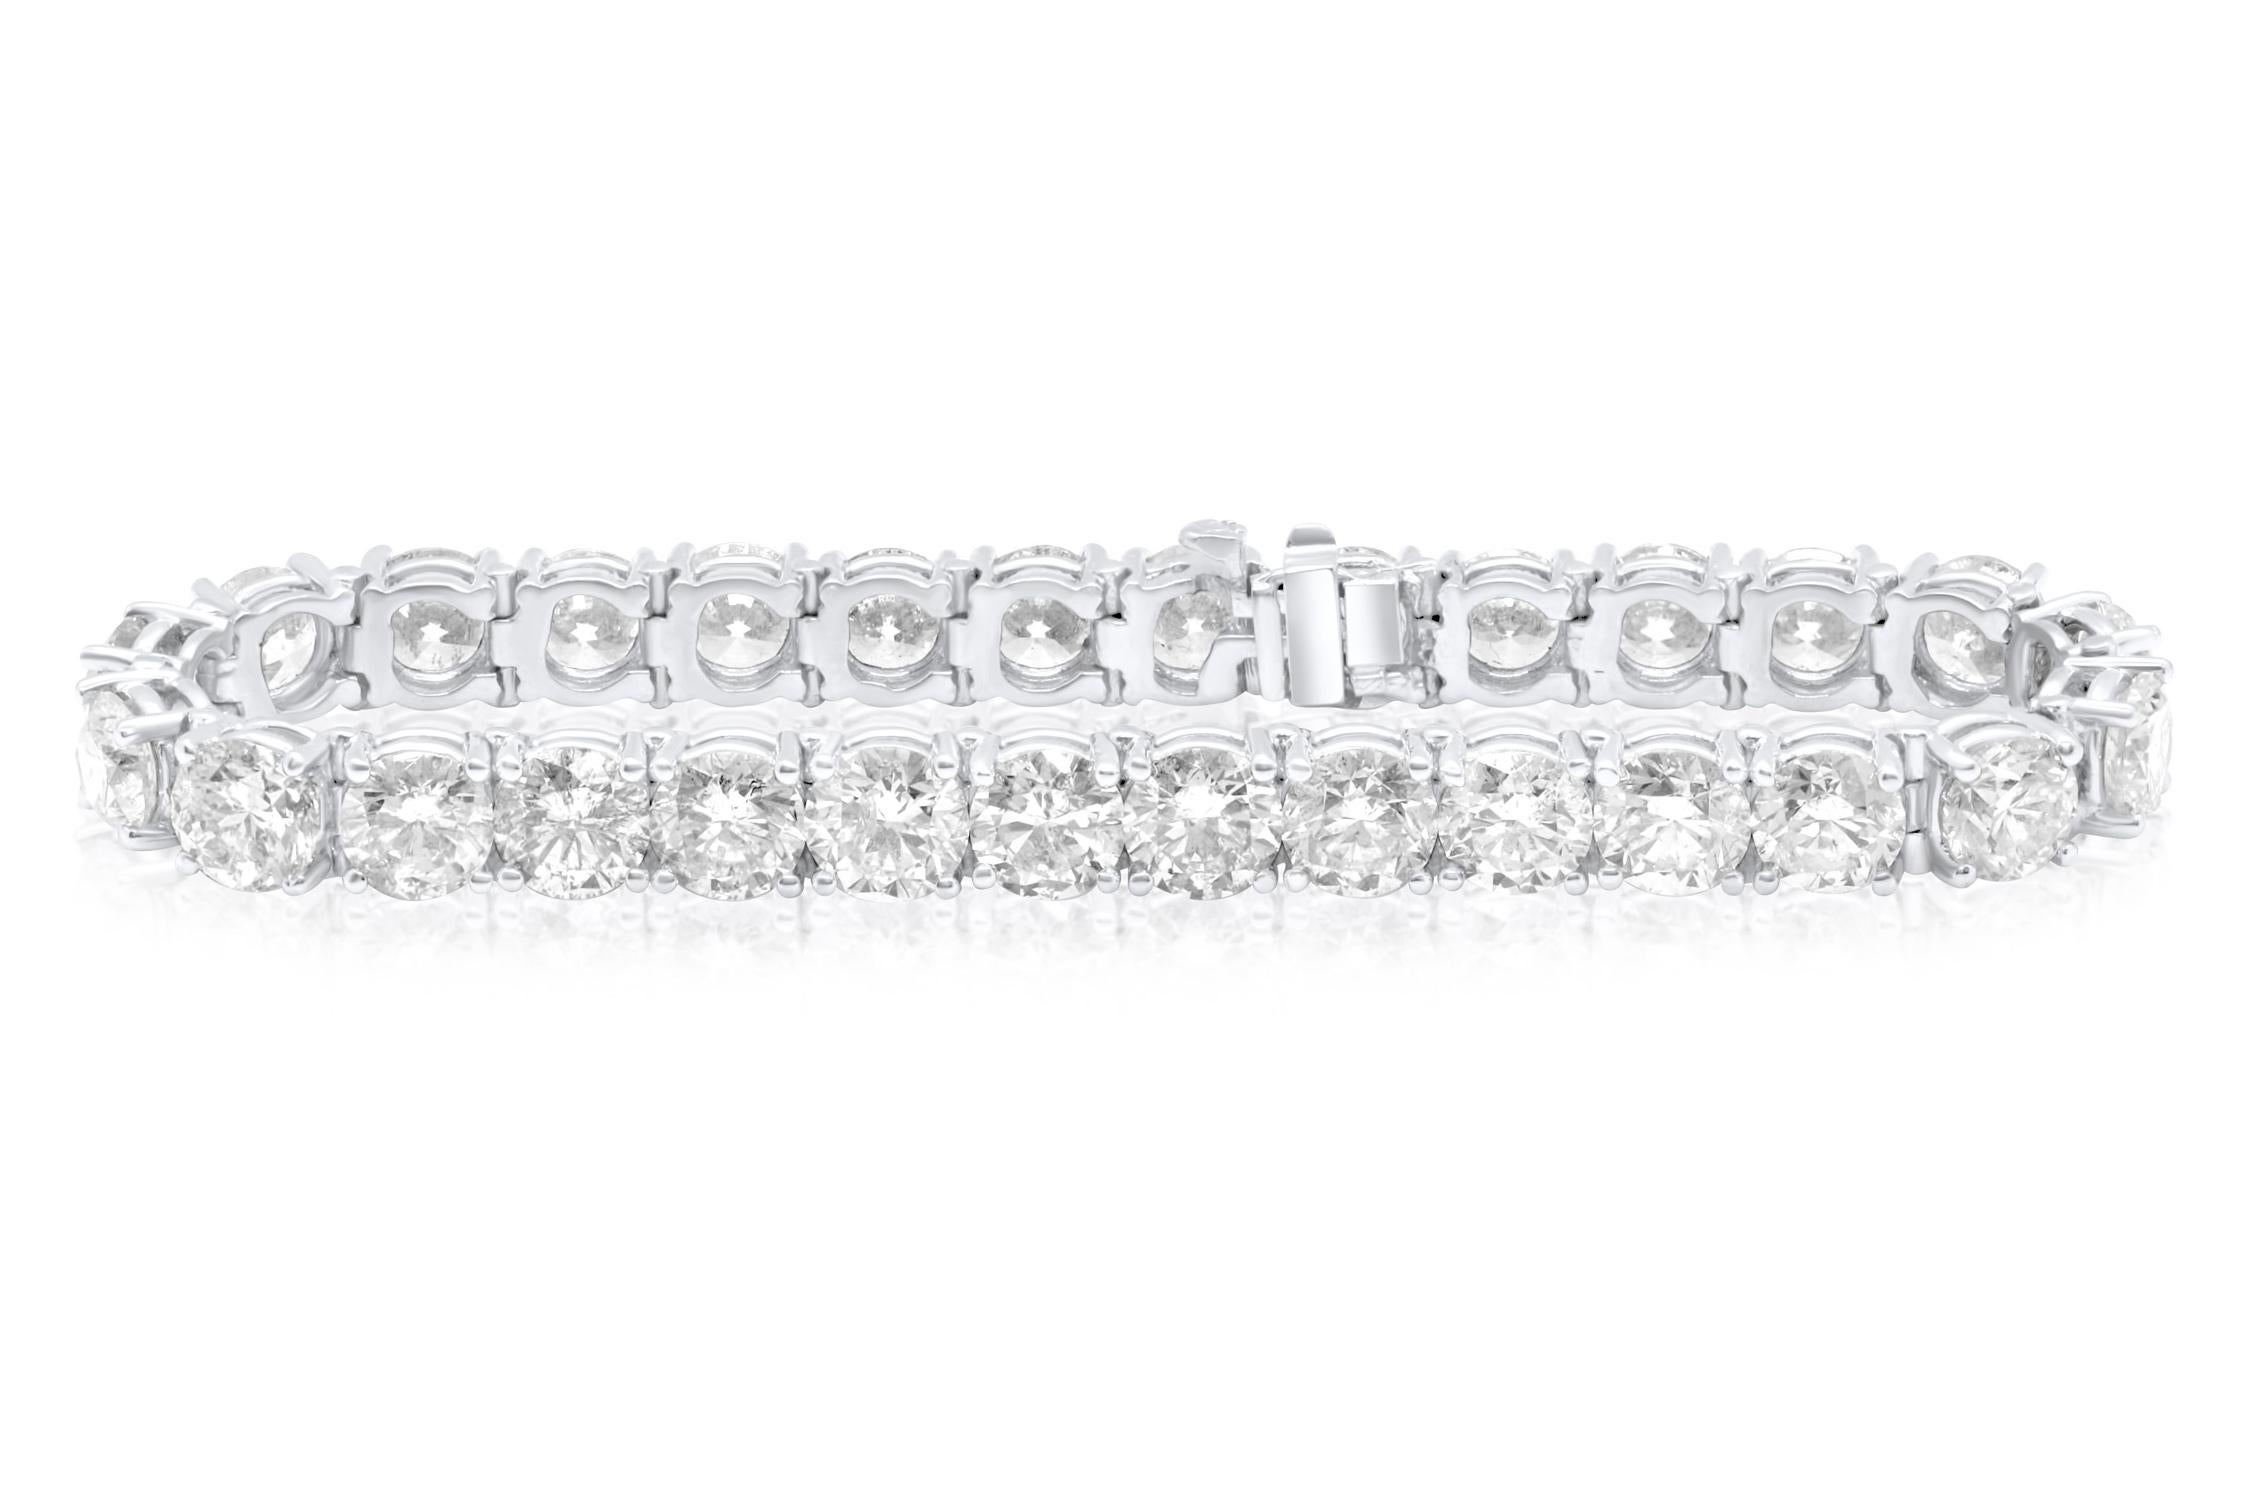 18 kt custom white gold prong diamond tennis bracelet  13.50 cts of round diamonds 0.35 each stone FG color SI clarity.  Excellent Cut.